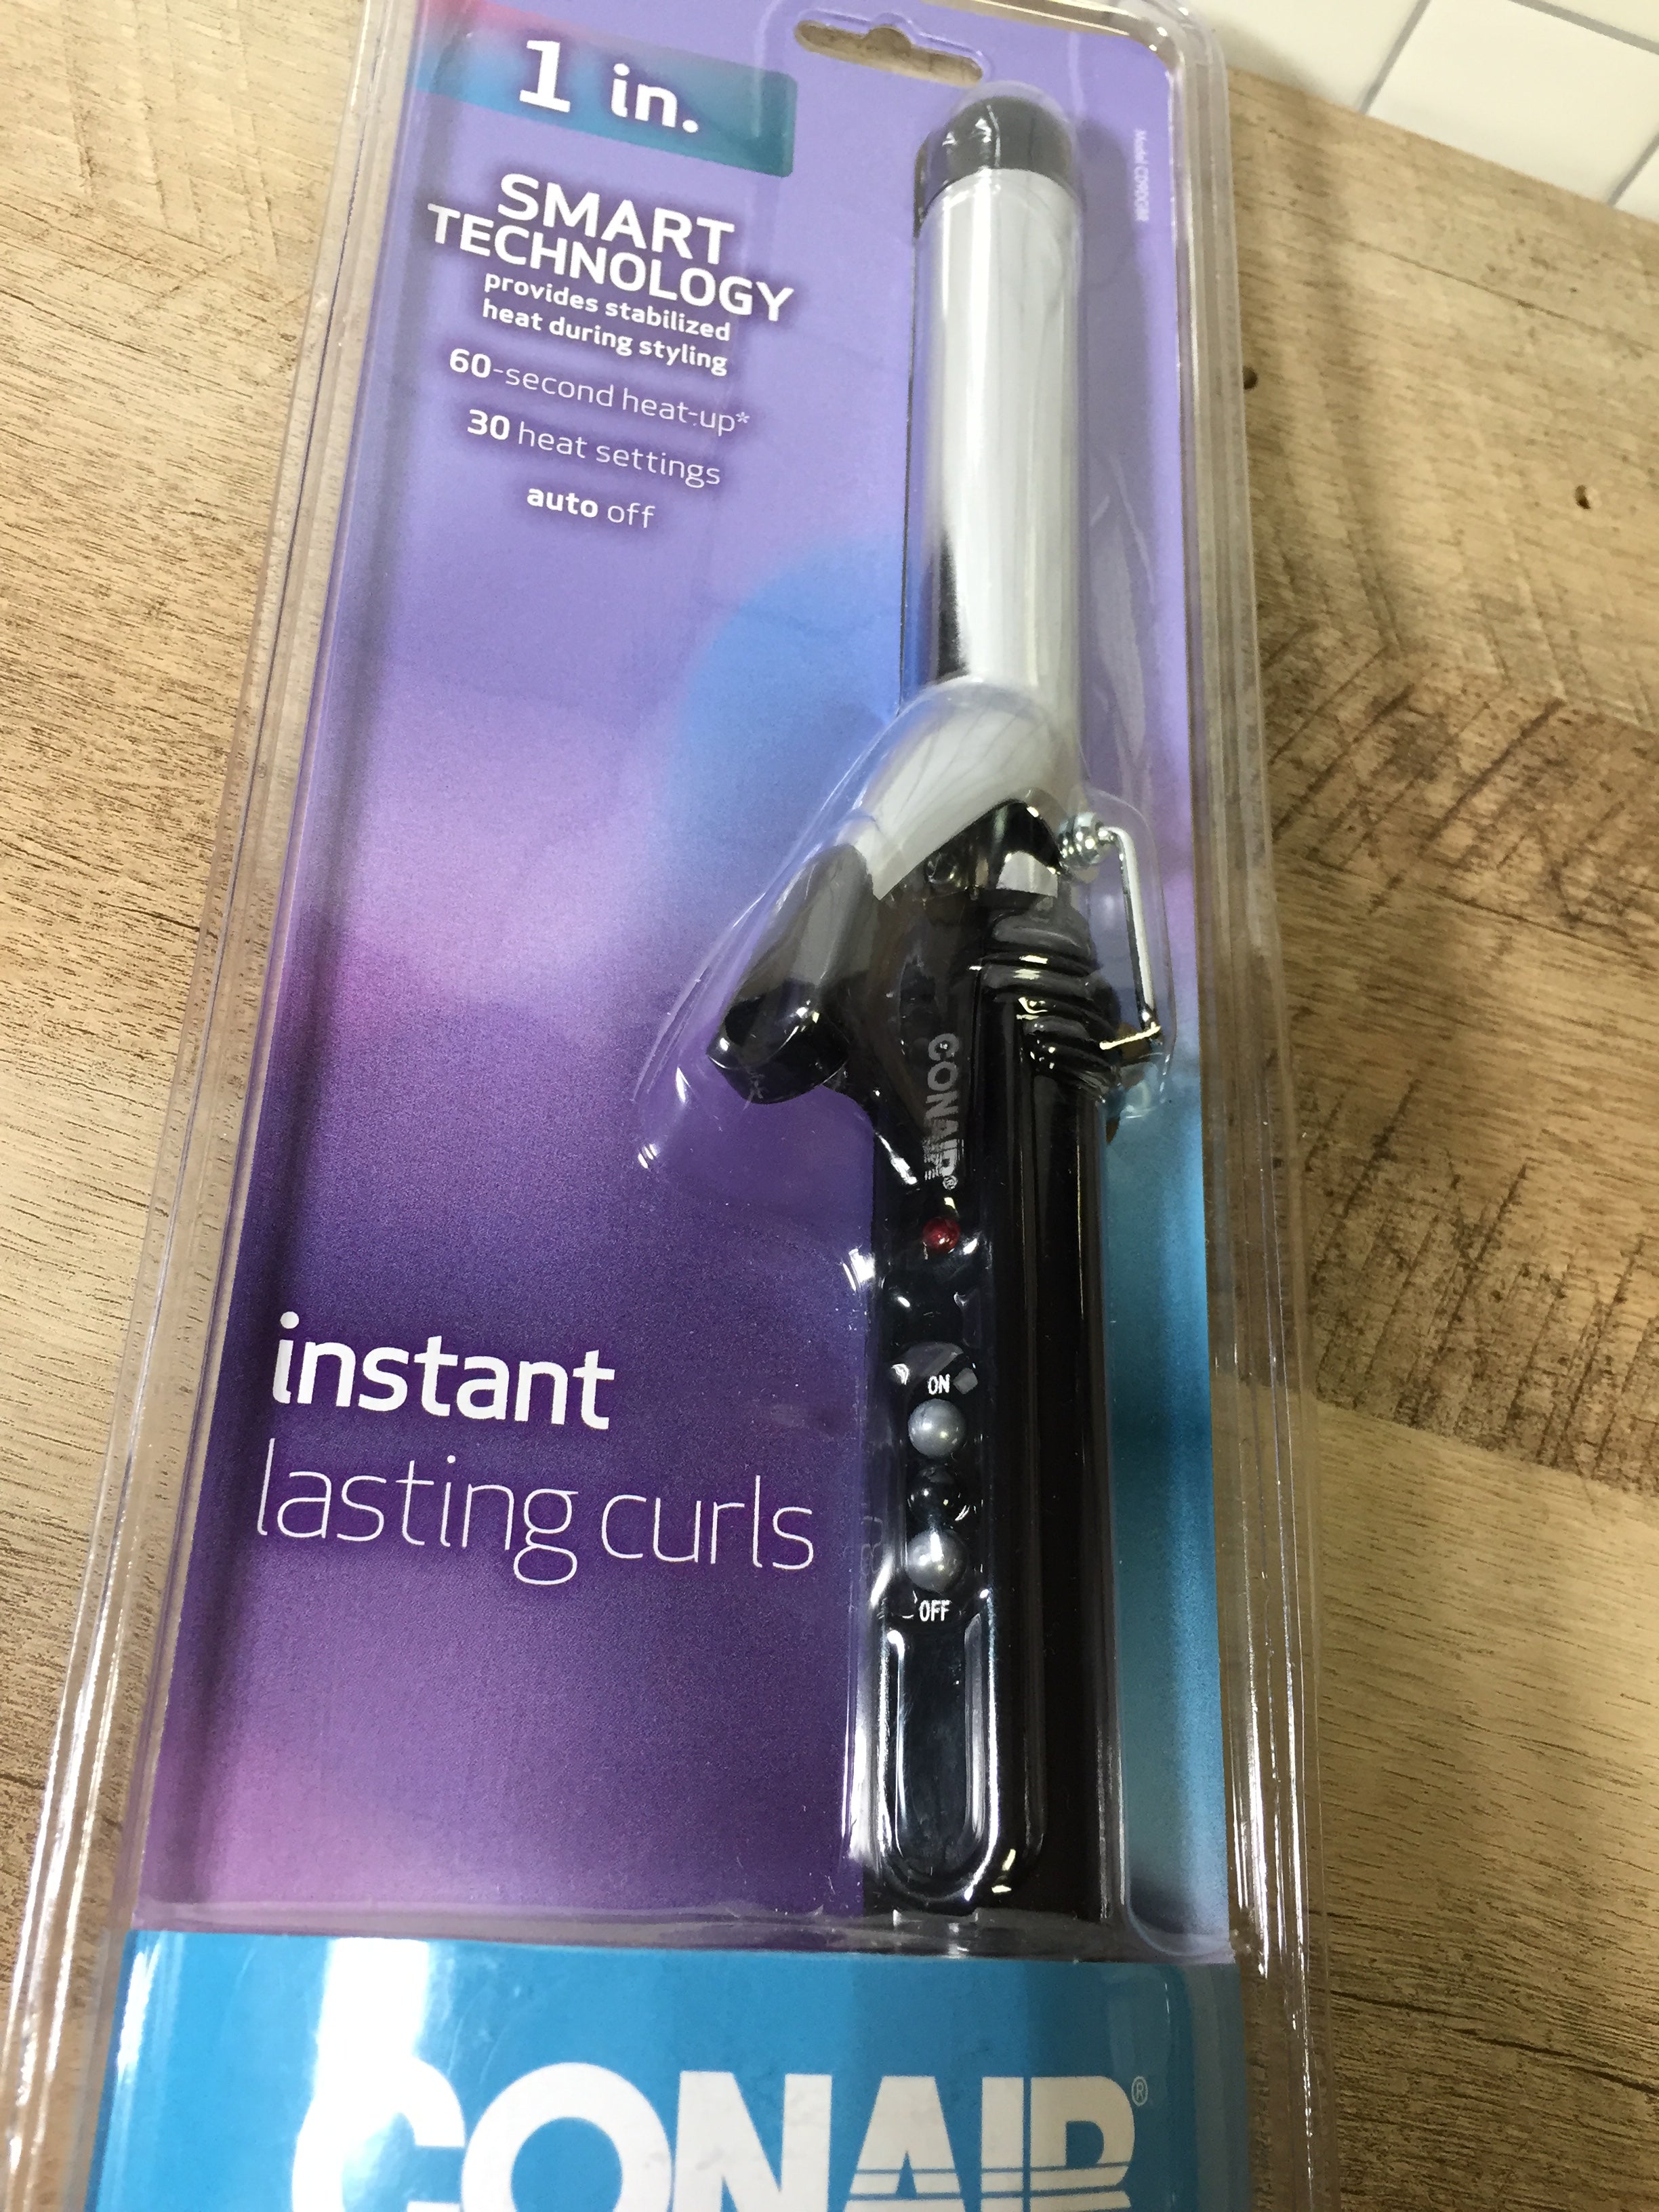 1 Inch Conair Instant Heat Curling Iron | Smart Technology (6930483577015)